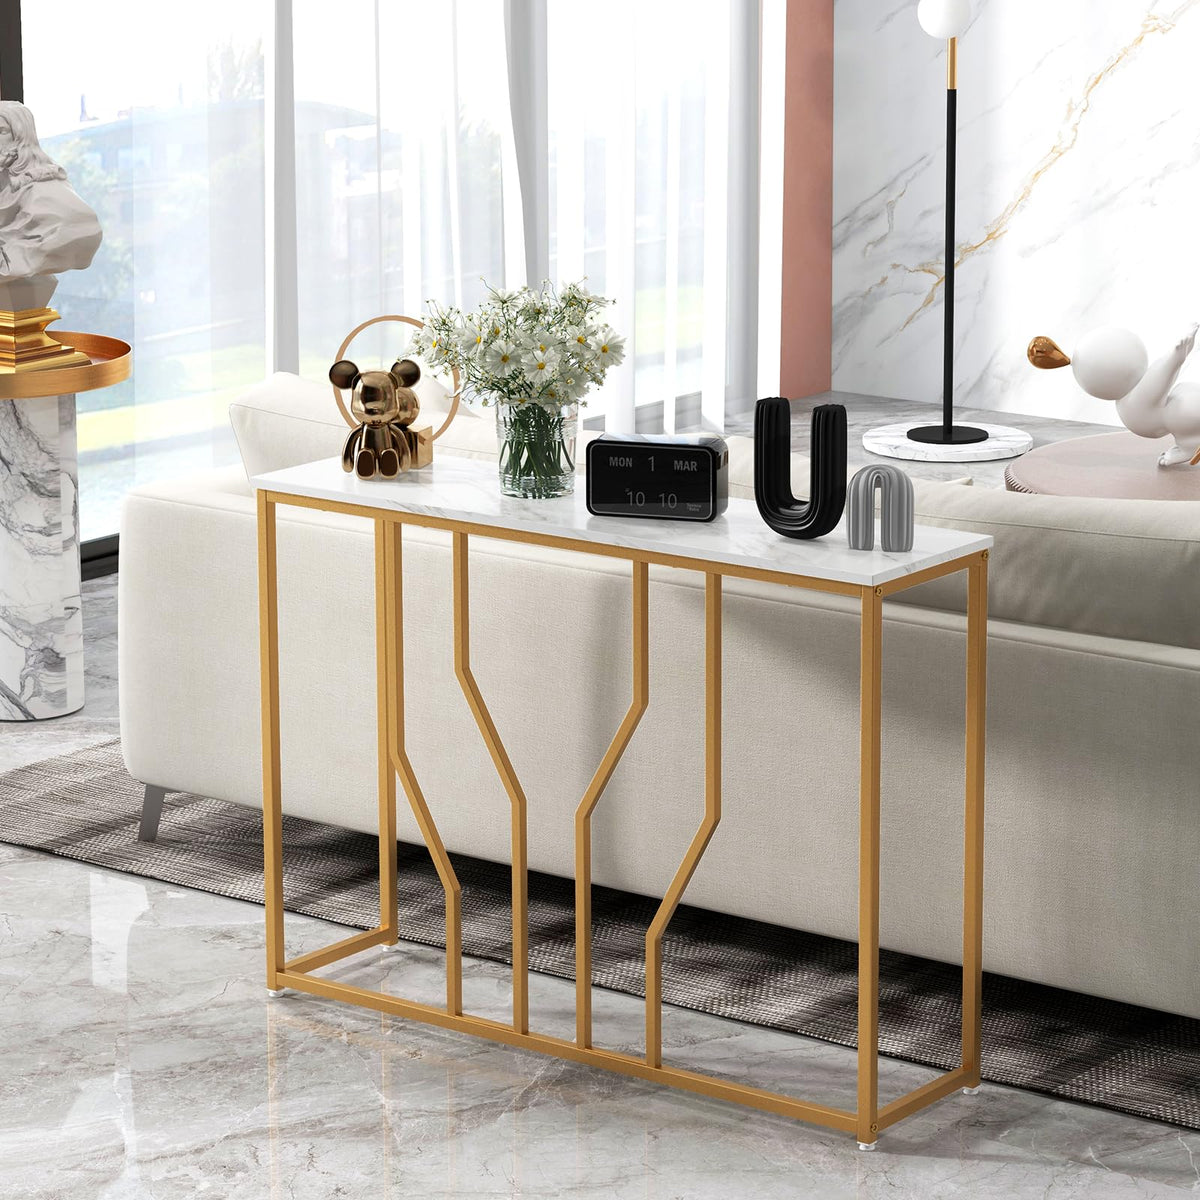 Giantex Gold Console Table, 110 cm Modern White Entryway Table with Faux Marble Tabletop